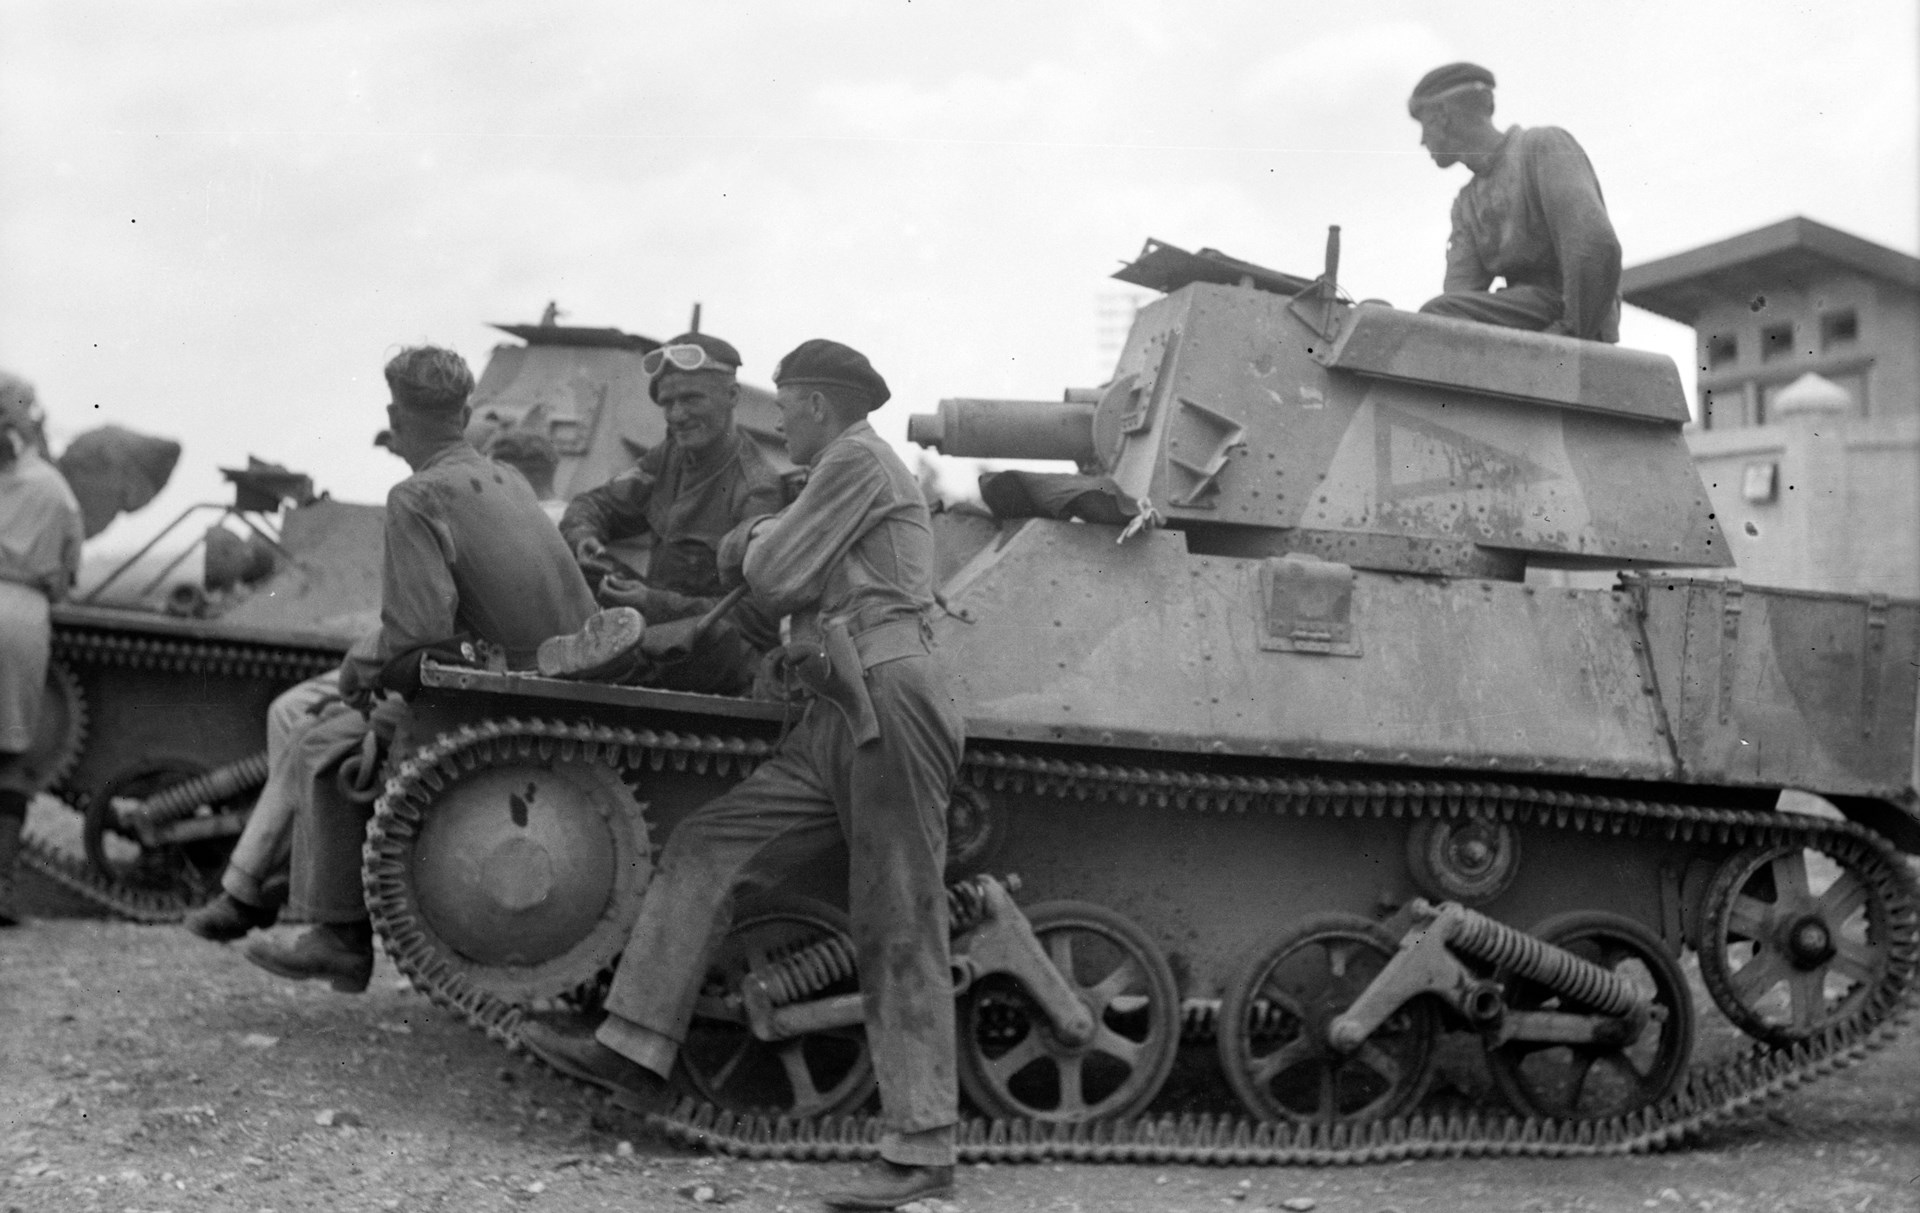 British forces in Palestine featured an armored component:  this Vickers light tank Mk III was armed with a turret-mounted .50 caliber Vickers machine gun (chambered for 12.7x81mm British).  Library of Congress